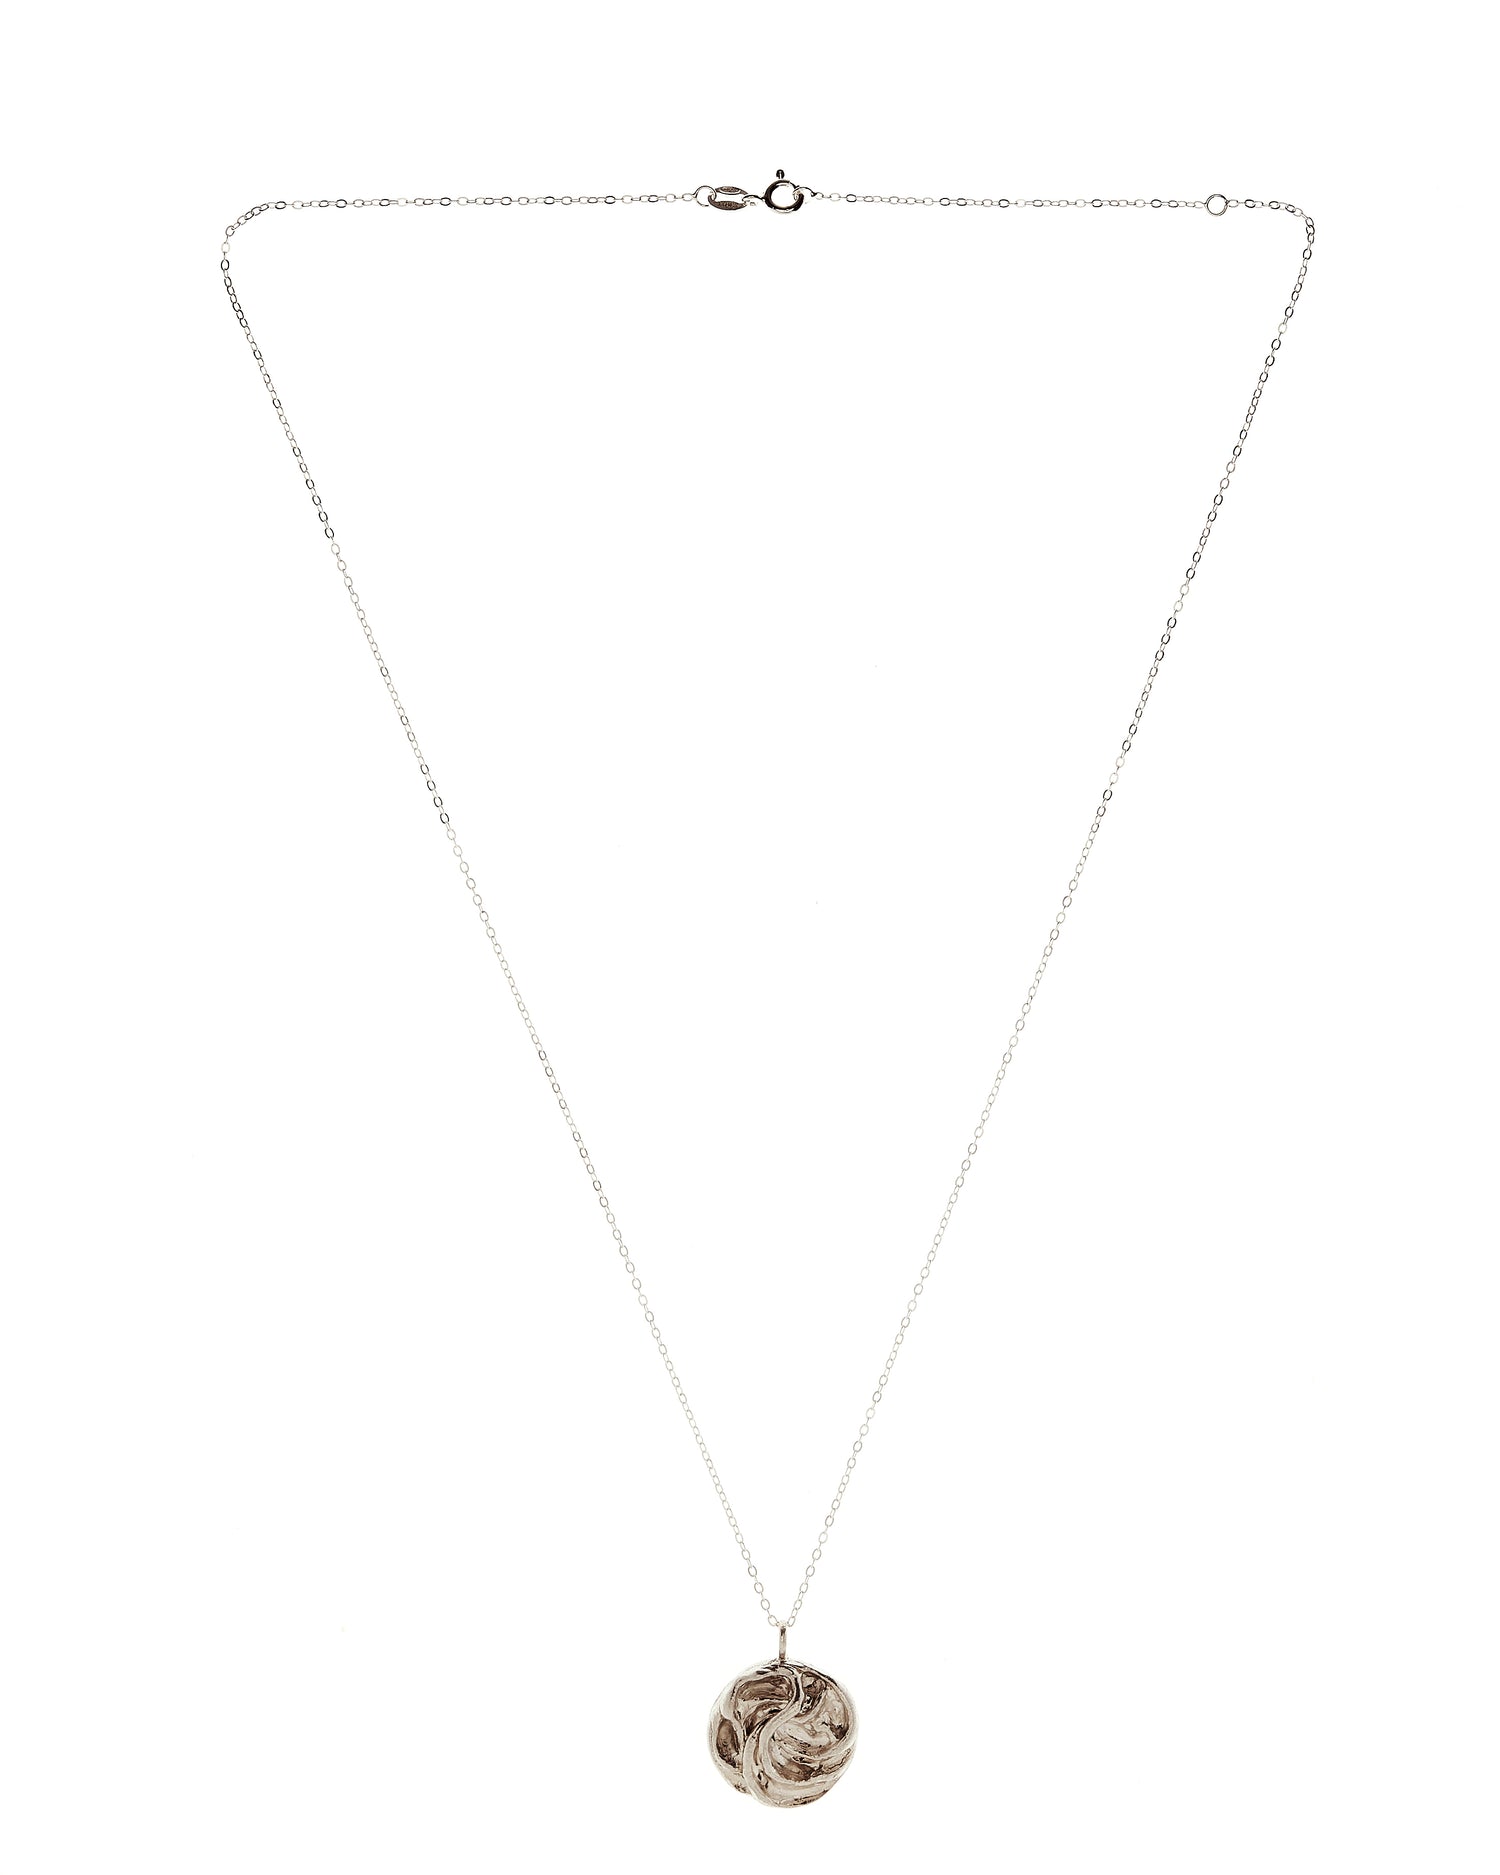 Sterling silver triskele necklace with delicate trace chain